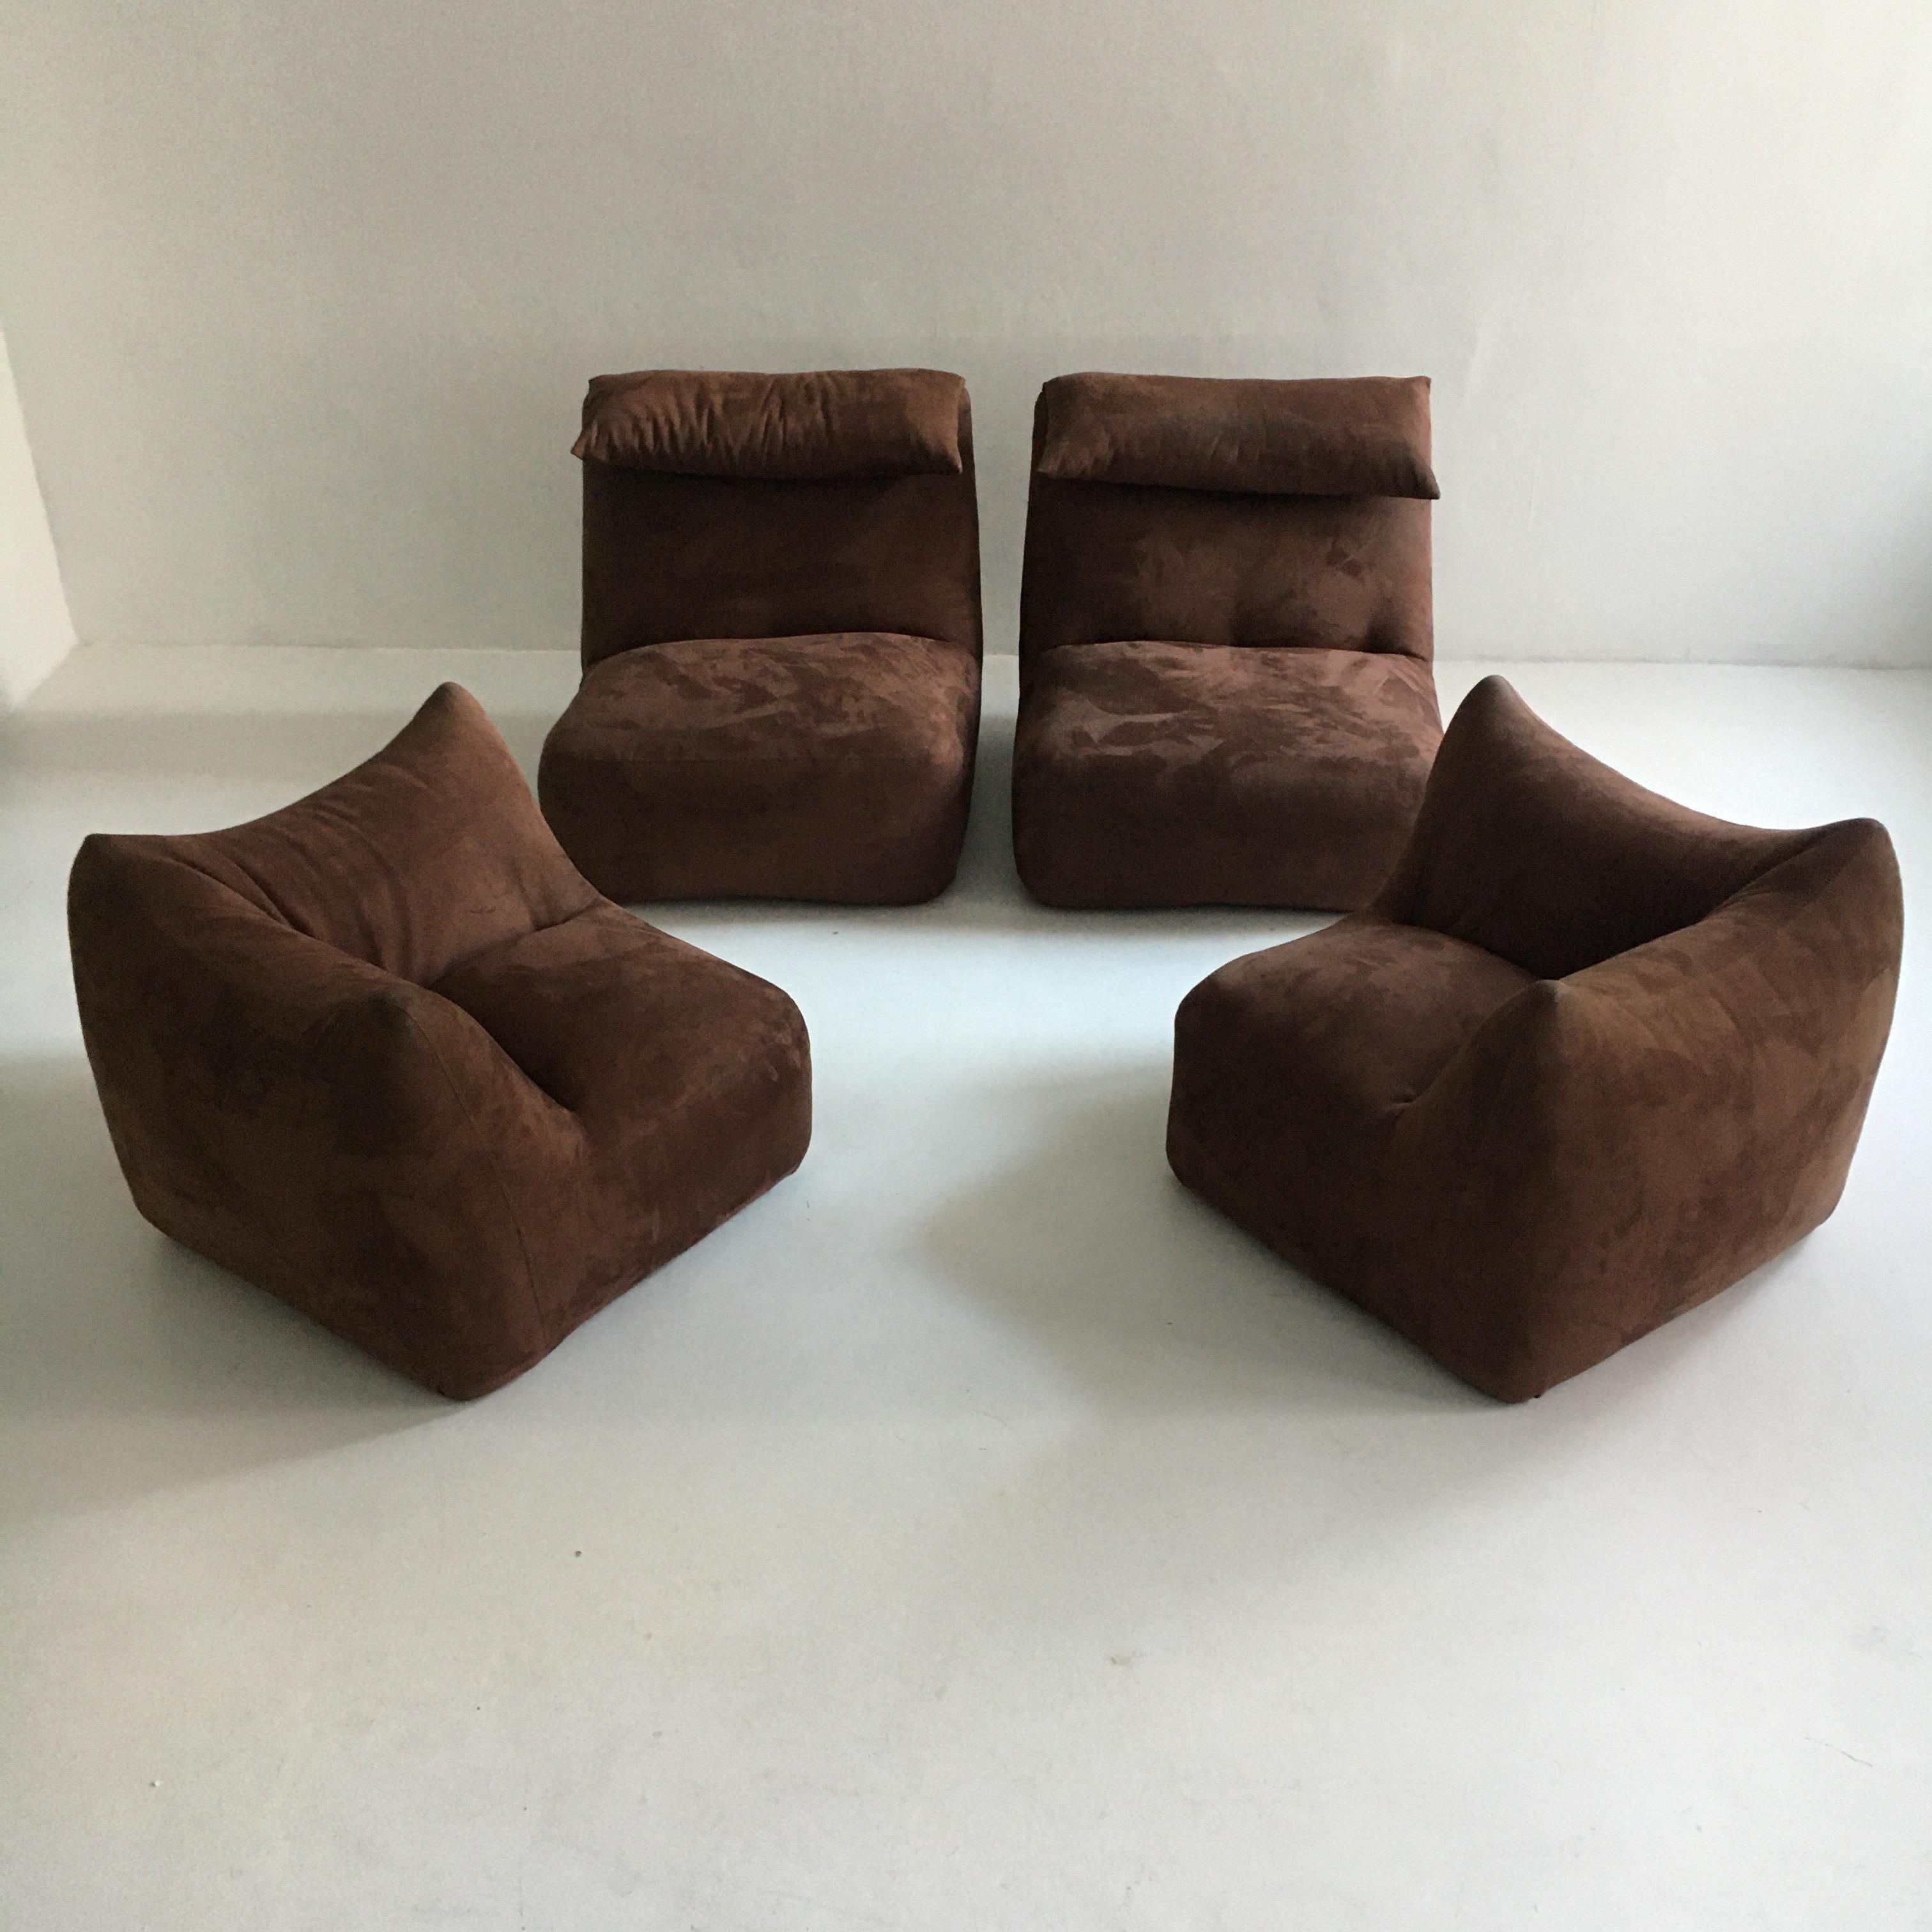 Mario Bellini 'Le Bambole' Two Modular Elements, Pair of Lounge Chairs, Italy 6